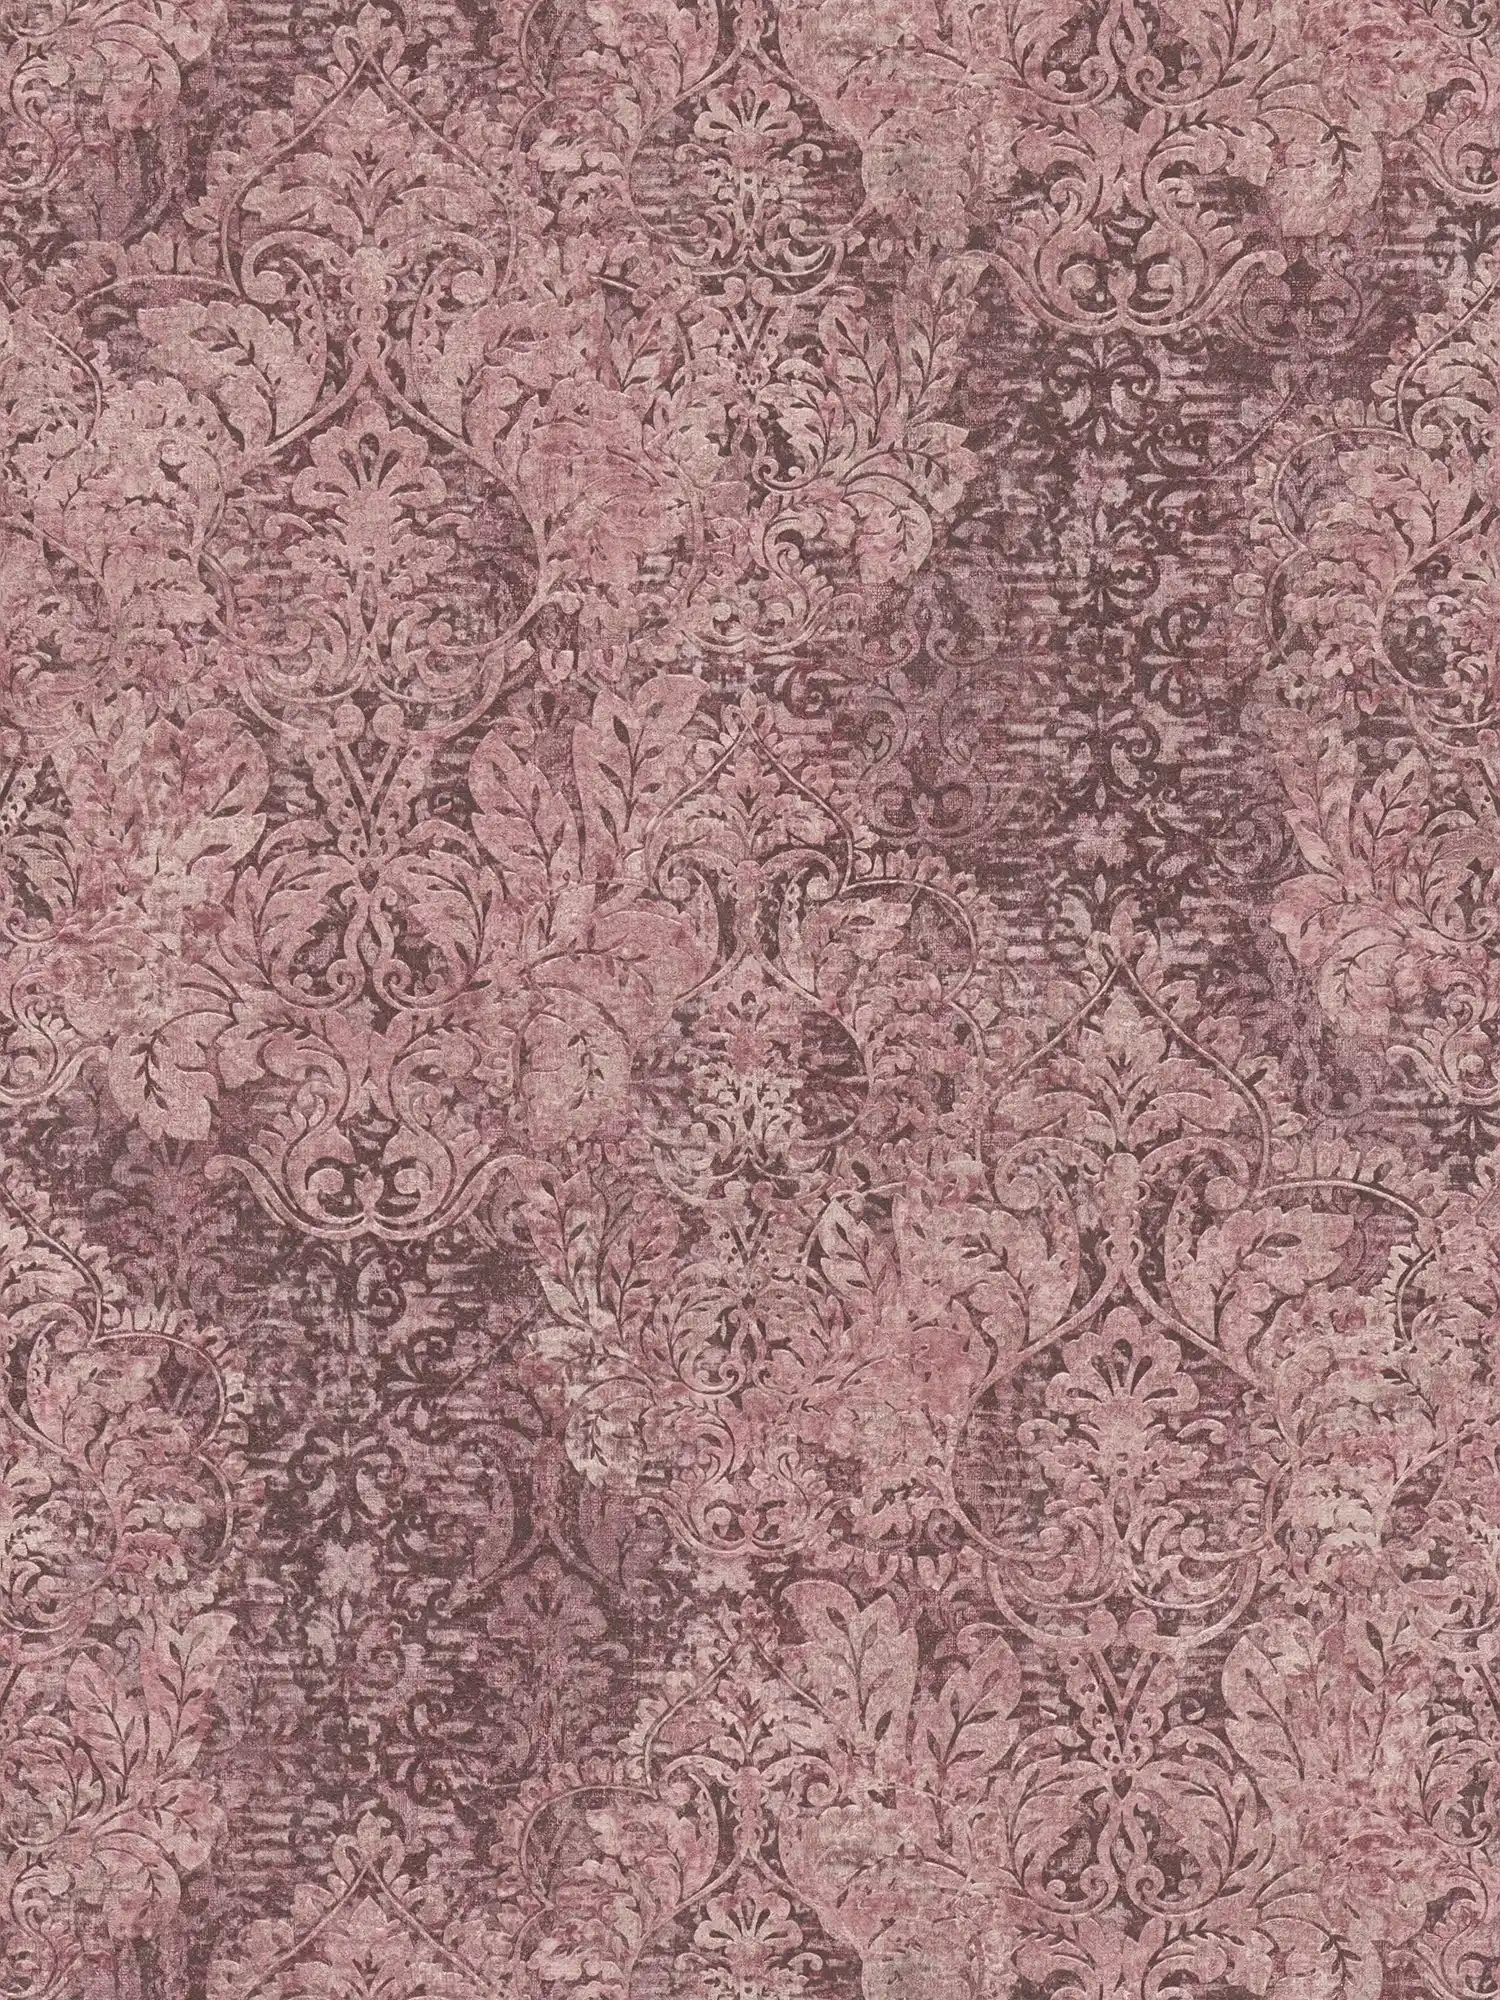 Vintage wallpaper with used look ornaments - pink
